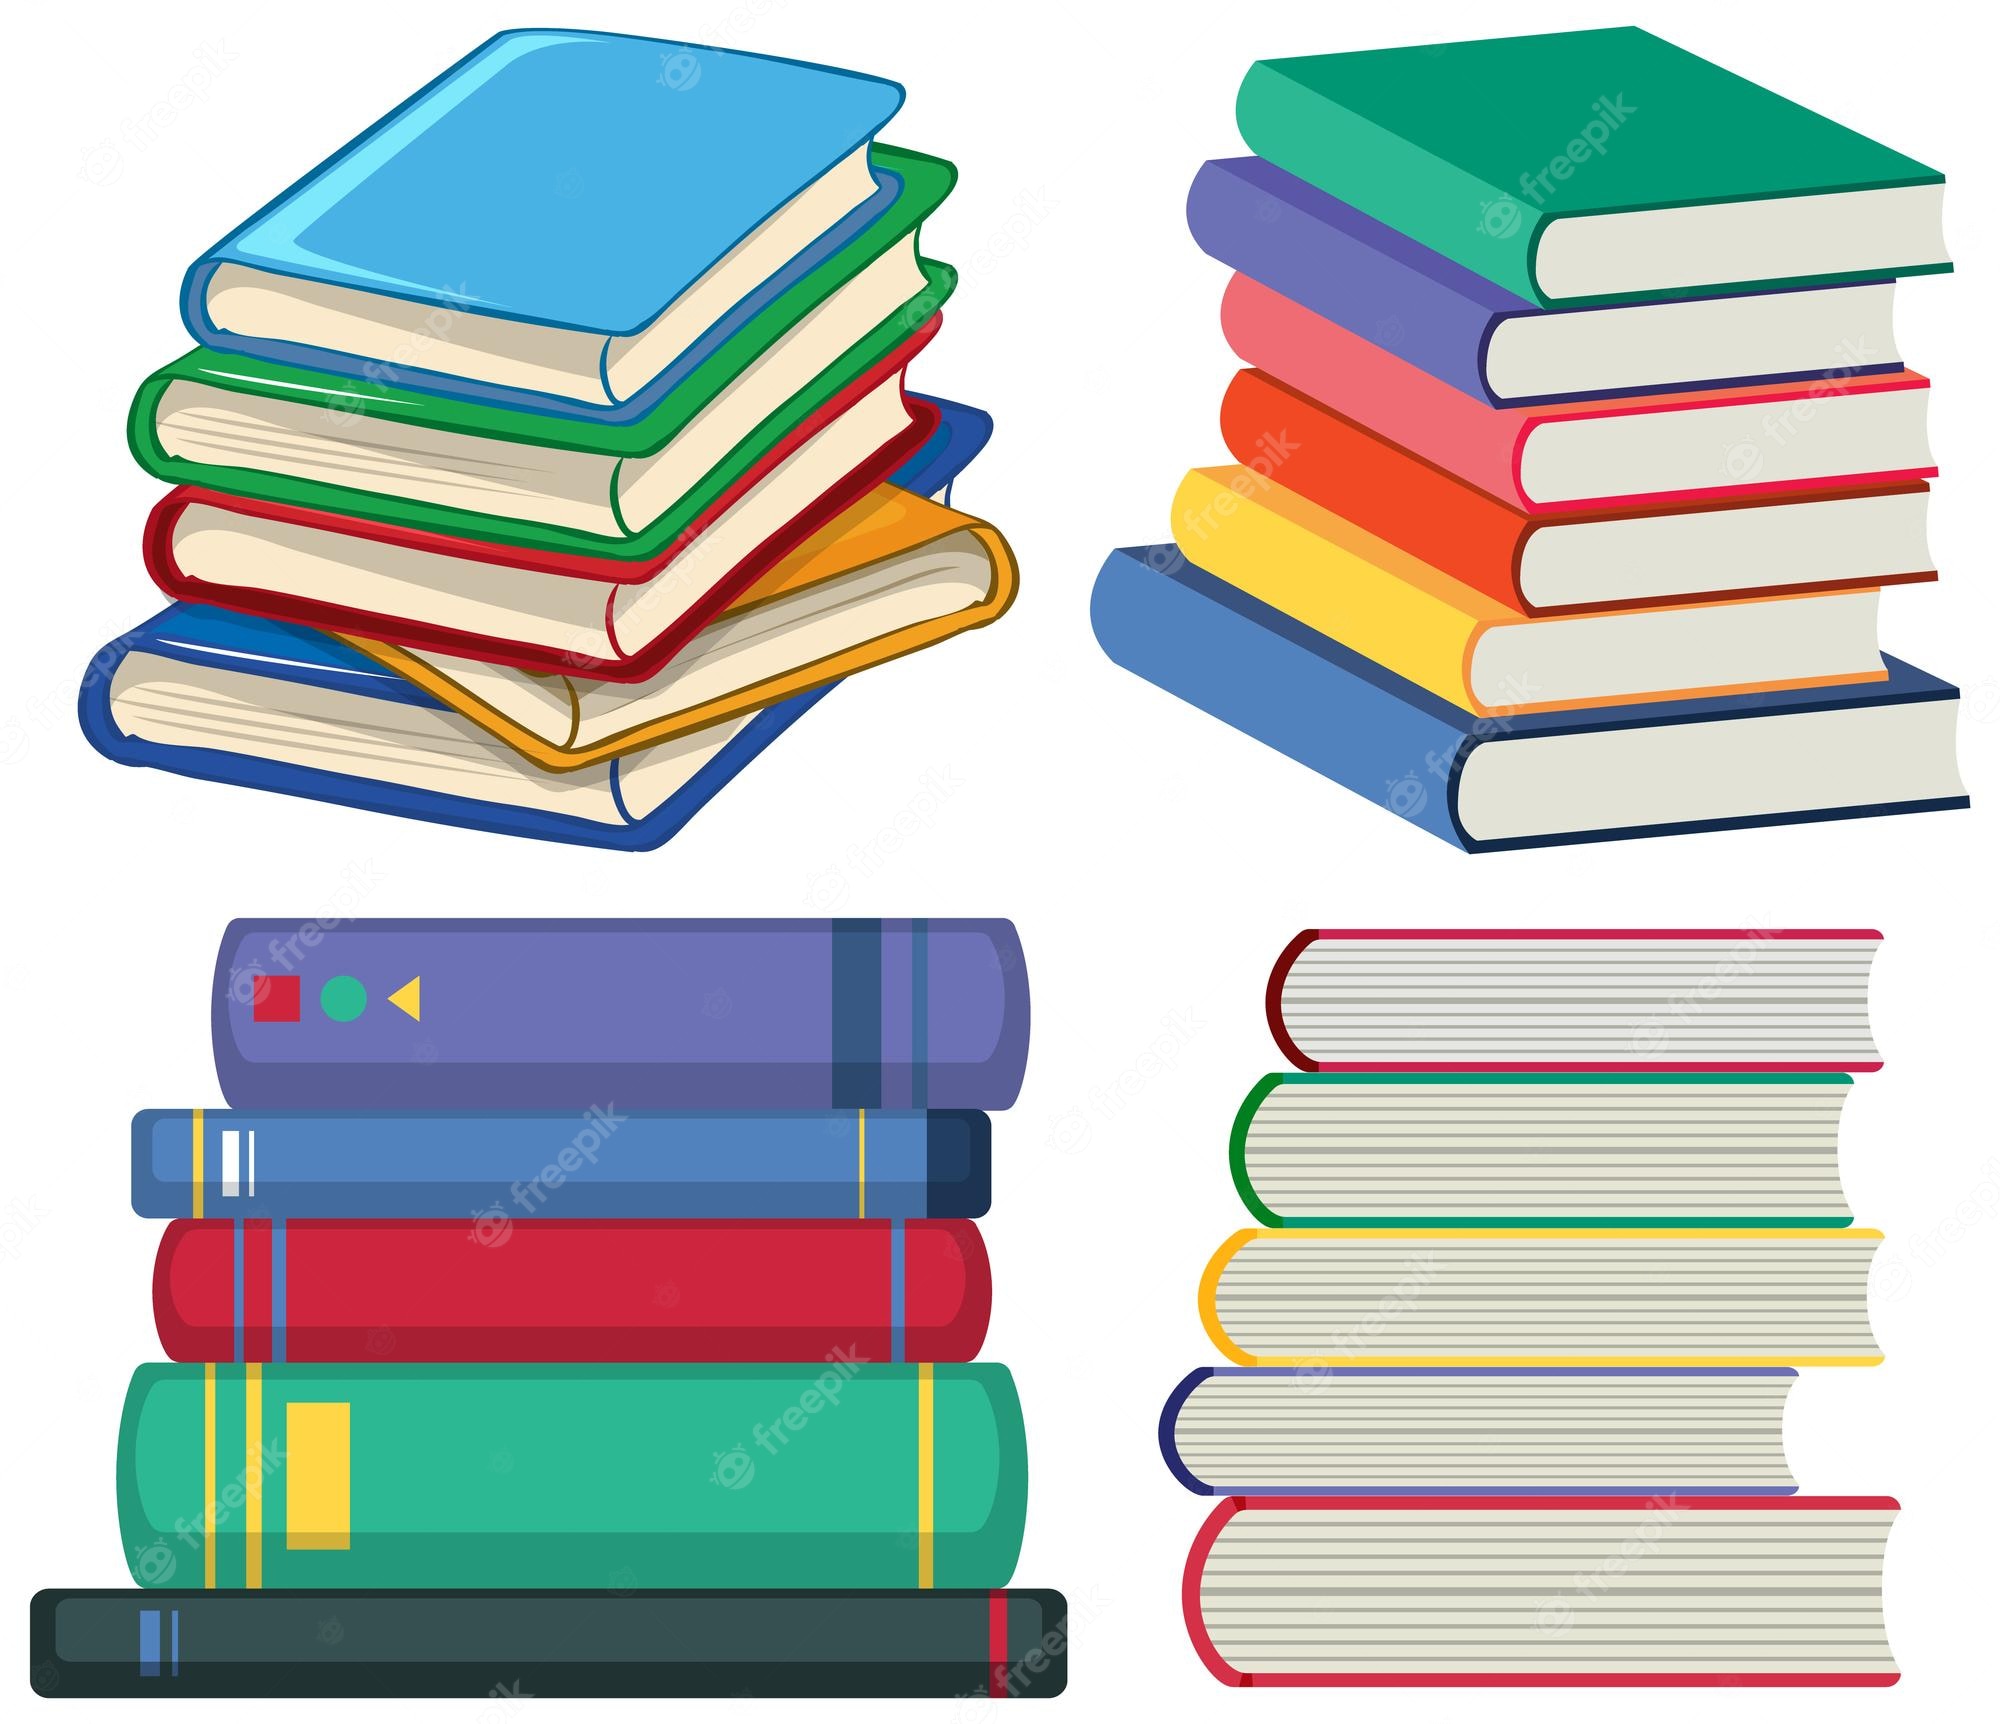 Clip art books with disc free clipart images - Clipart Library - Clip ...